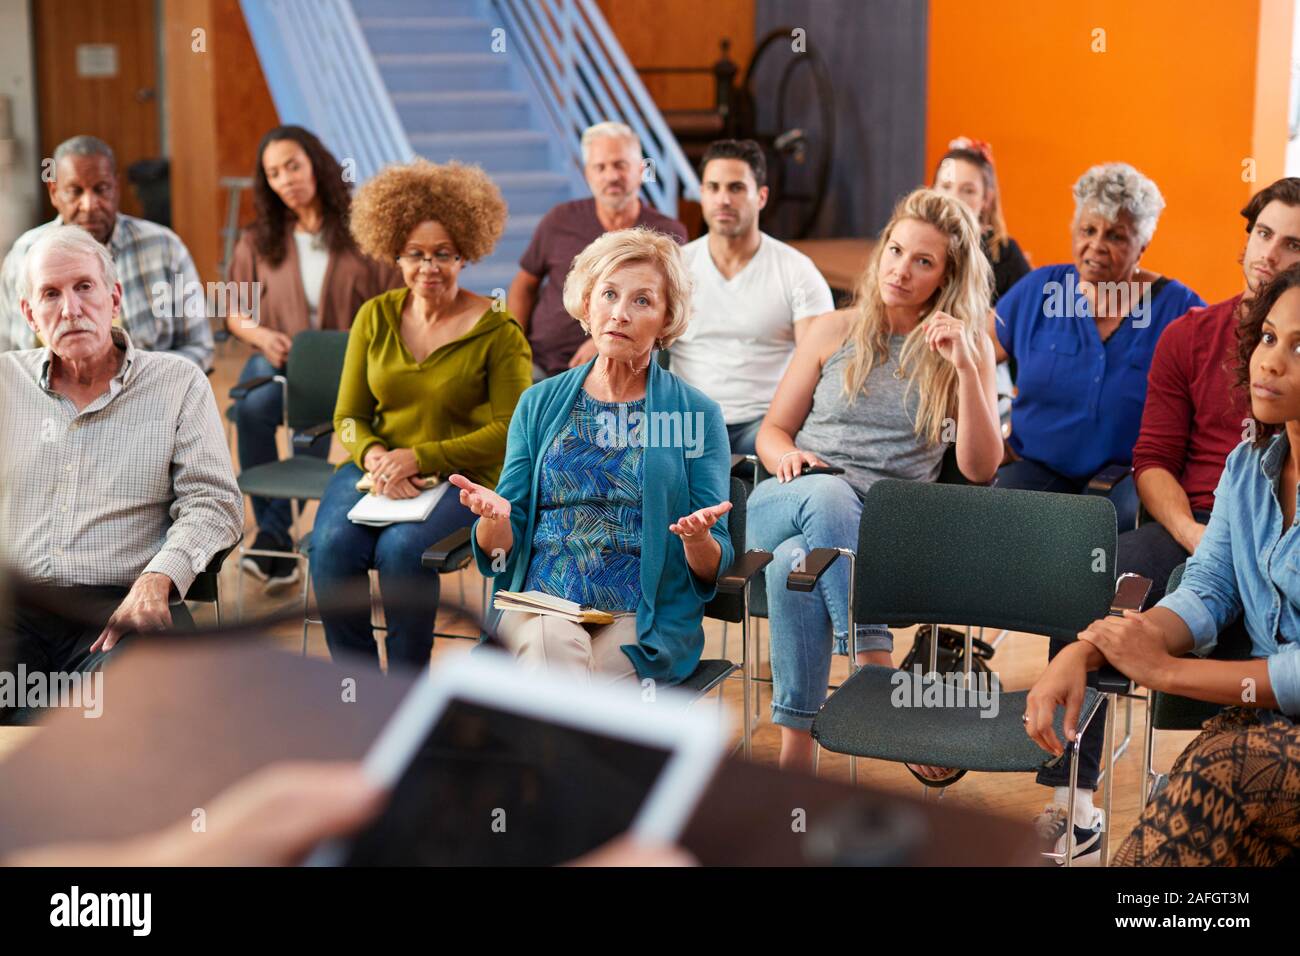 Woman Speaking At Group Neighborhood Meeting In Community Center Stock Photo